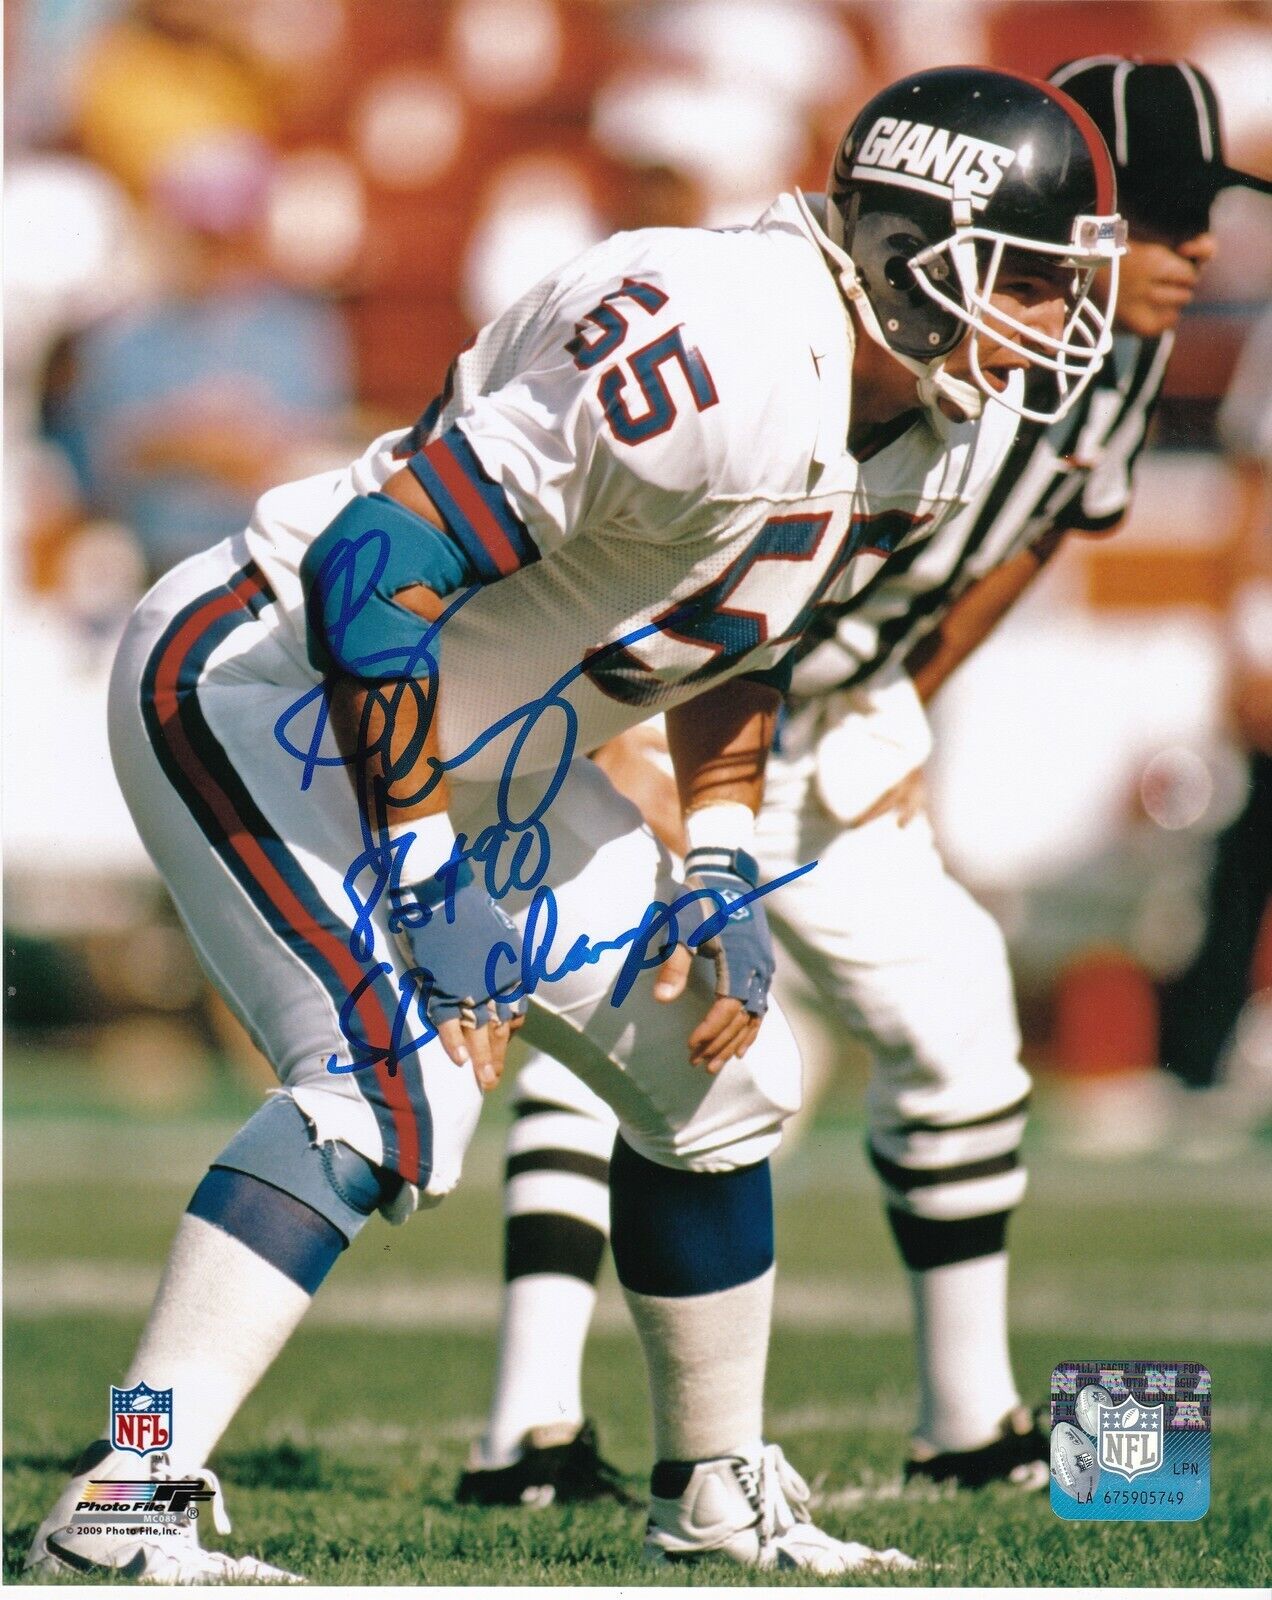 GARY REASONS NEW YORK GIANTS 86,90 SB CHAMPS ACTION SIGNED 8x10